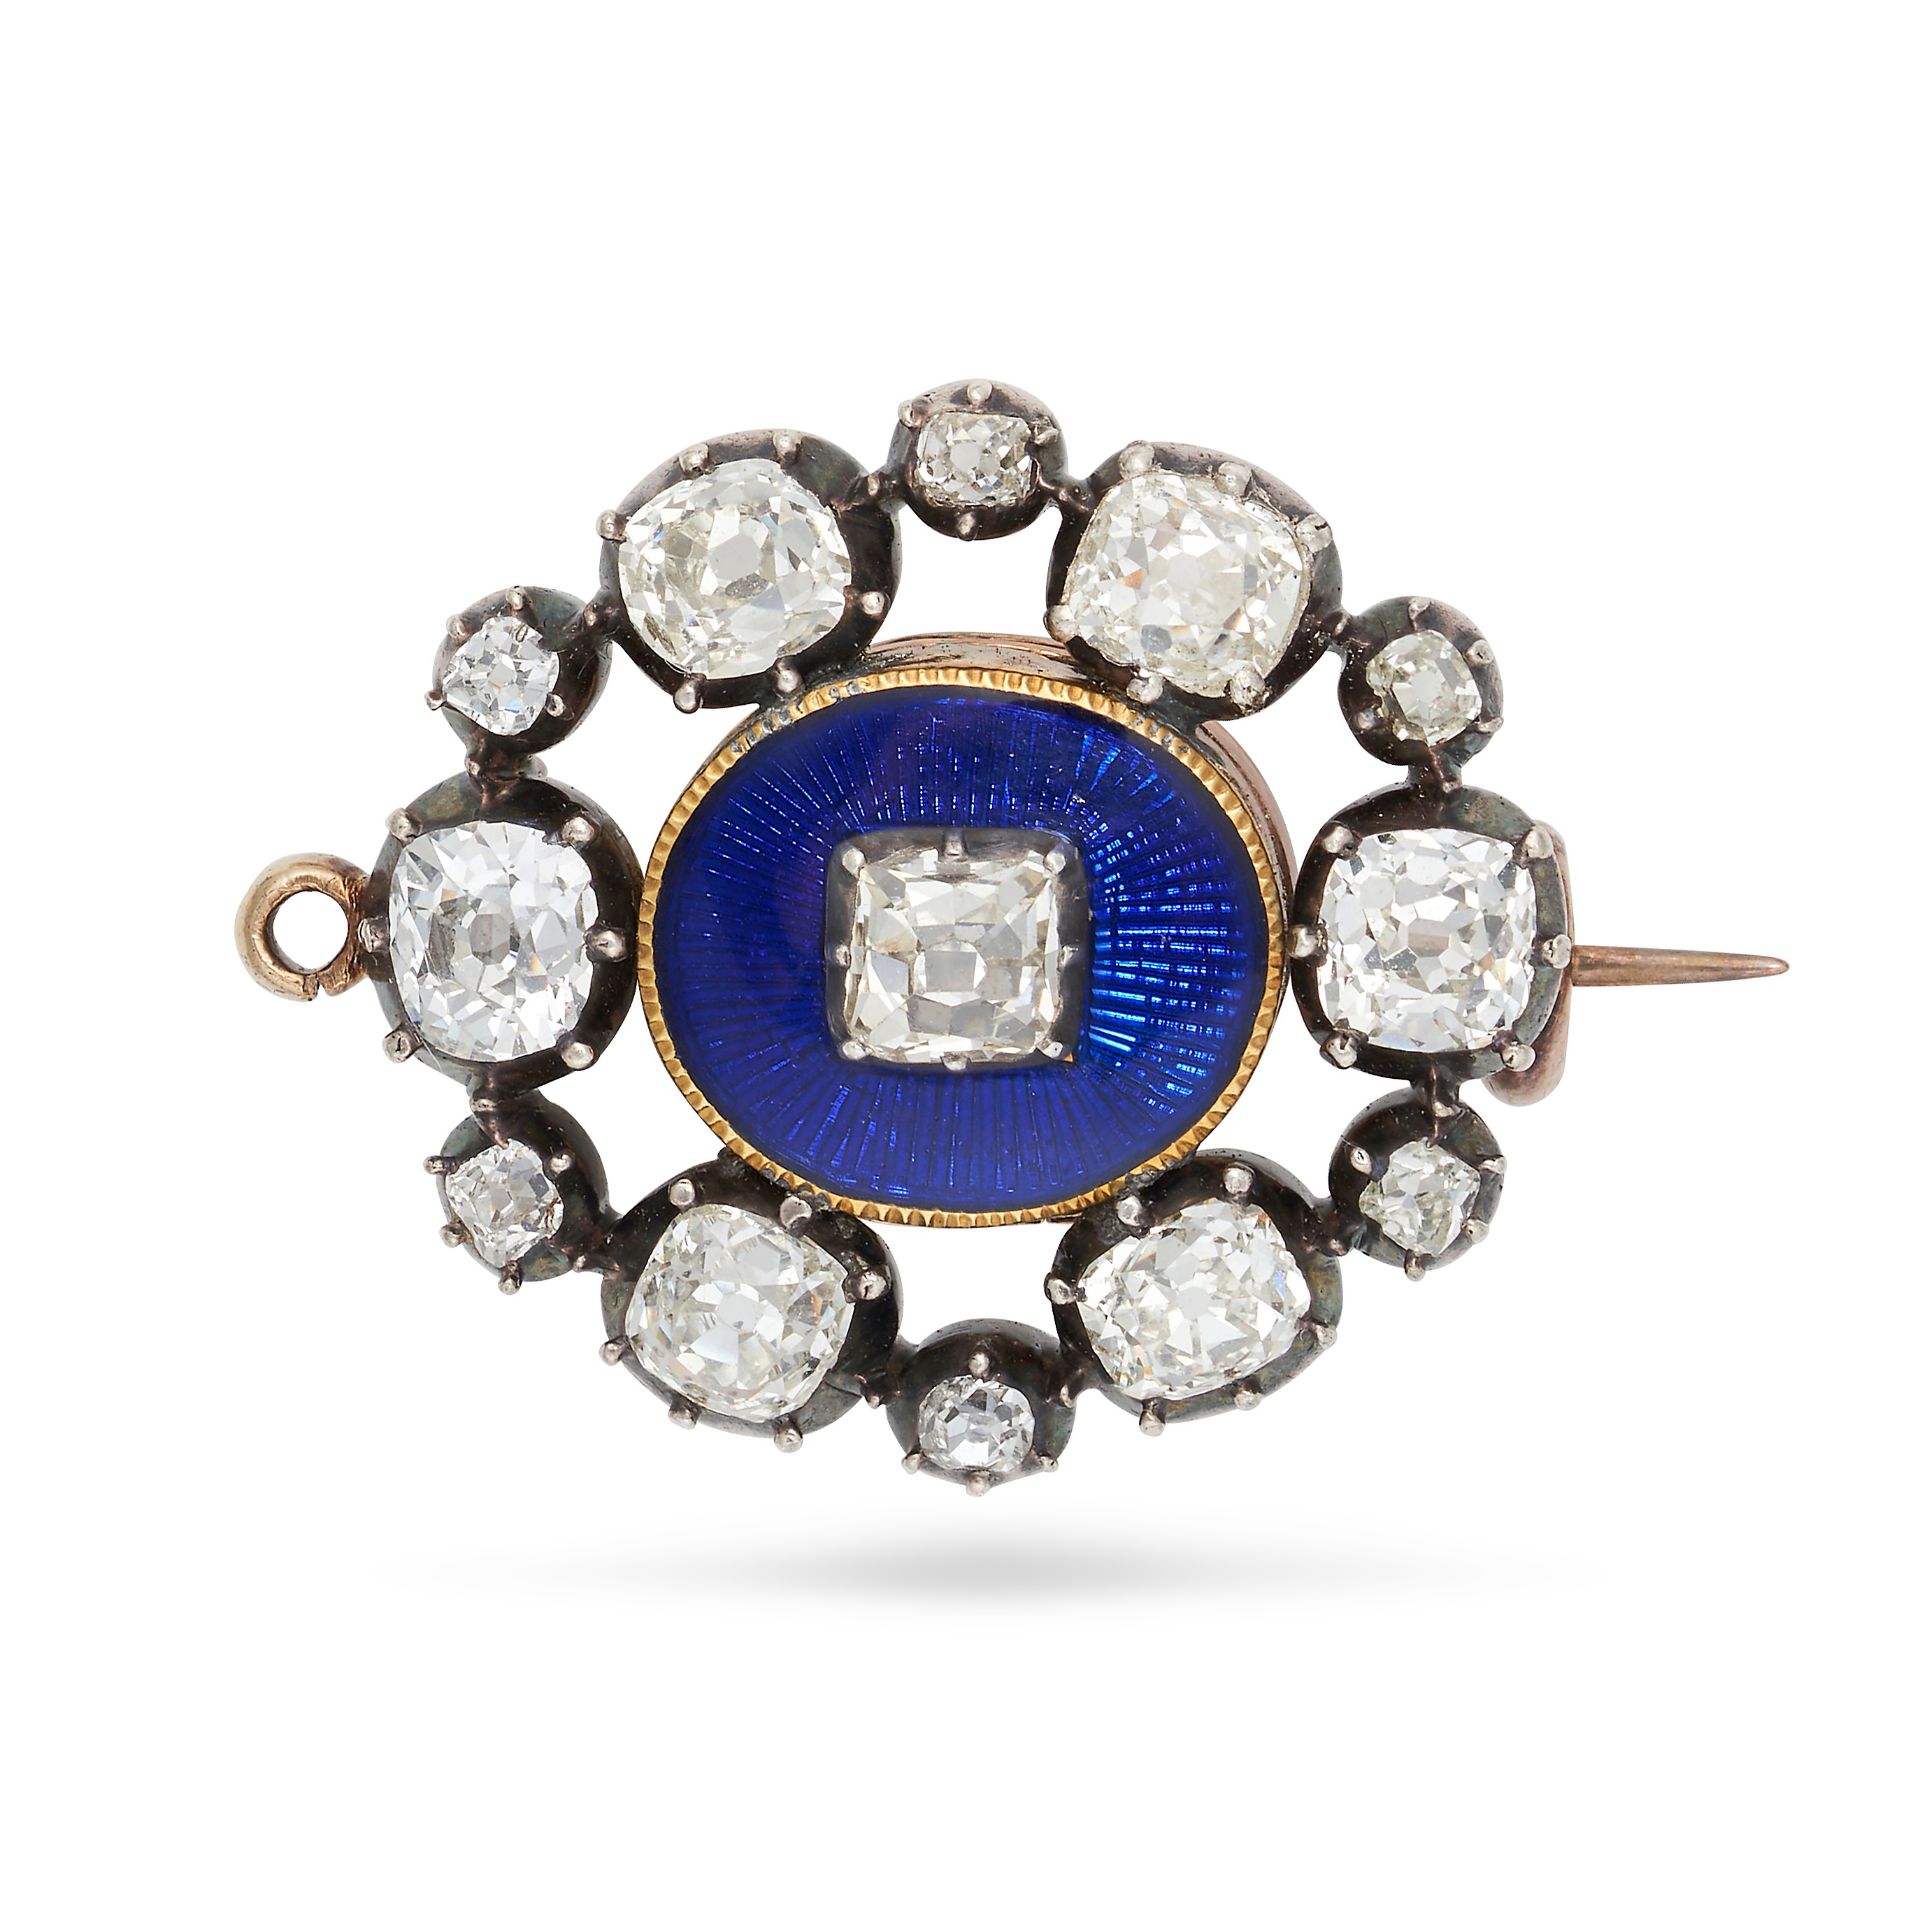 A FINE ANTIQUE DIAMOND AND ENAMEL BROOCH / PENDANT in yellow gold and silver, the oval body set w...